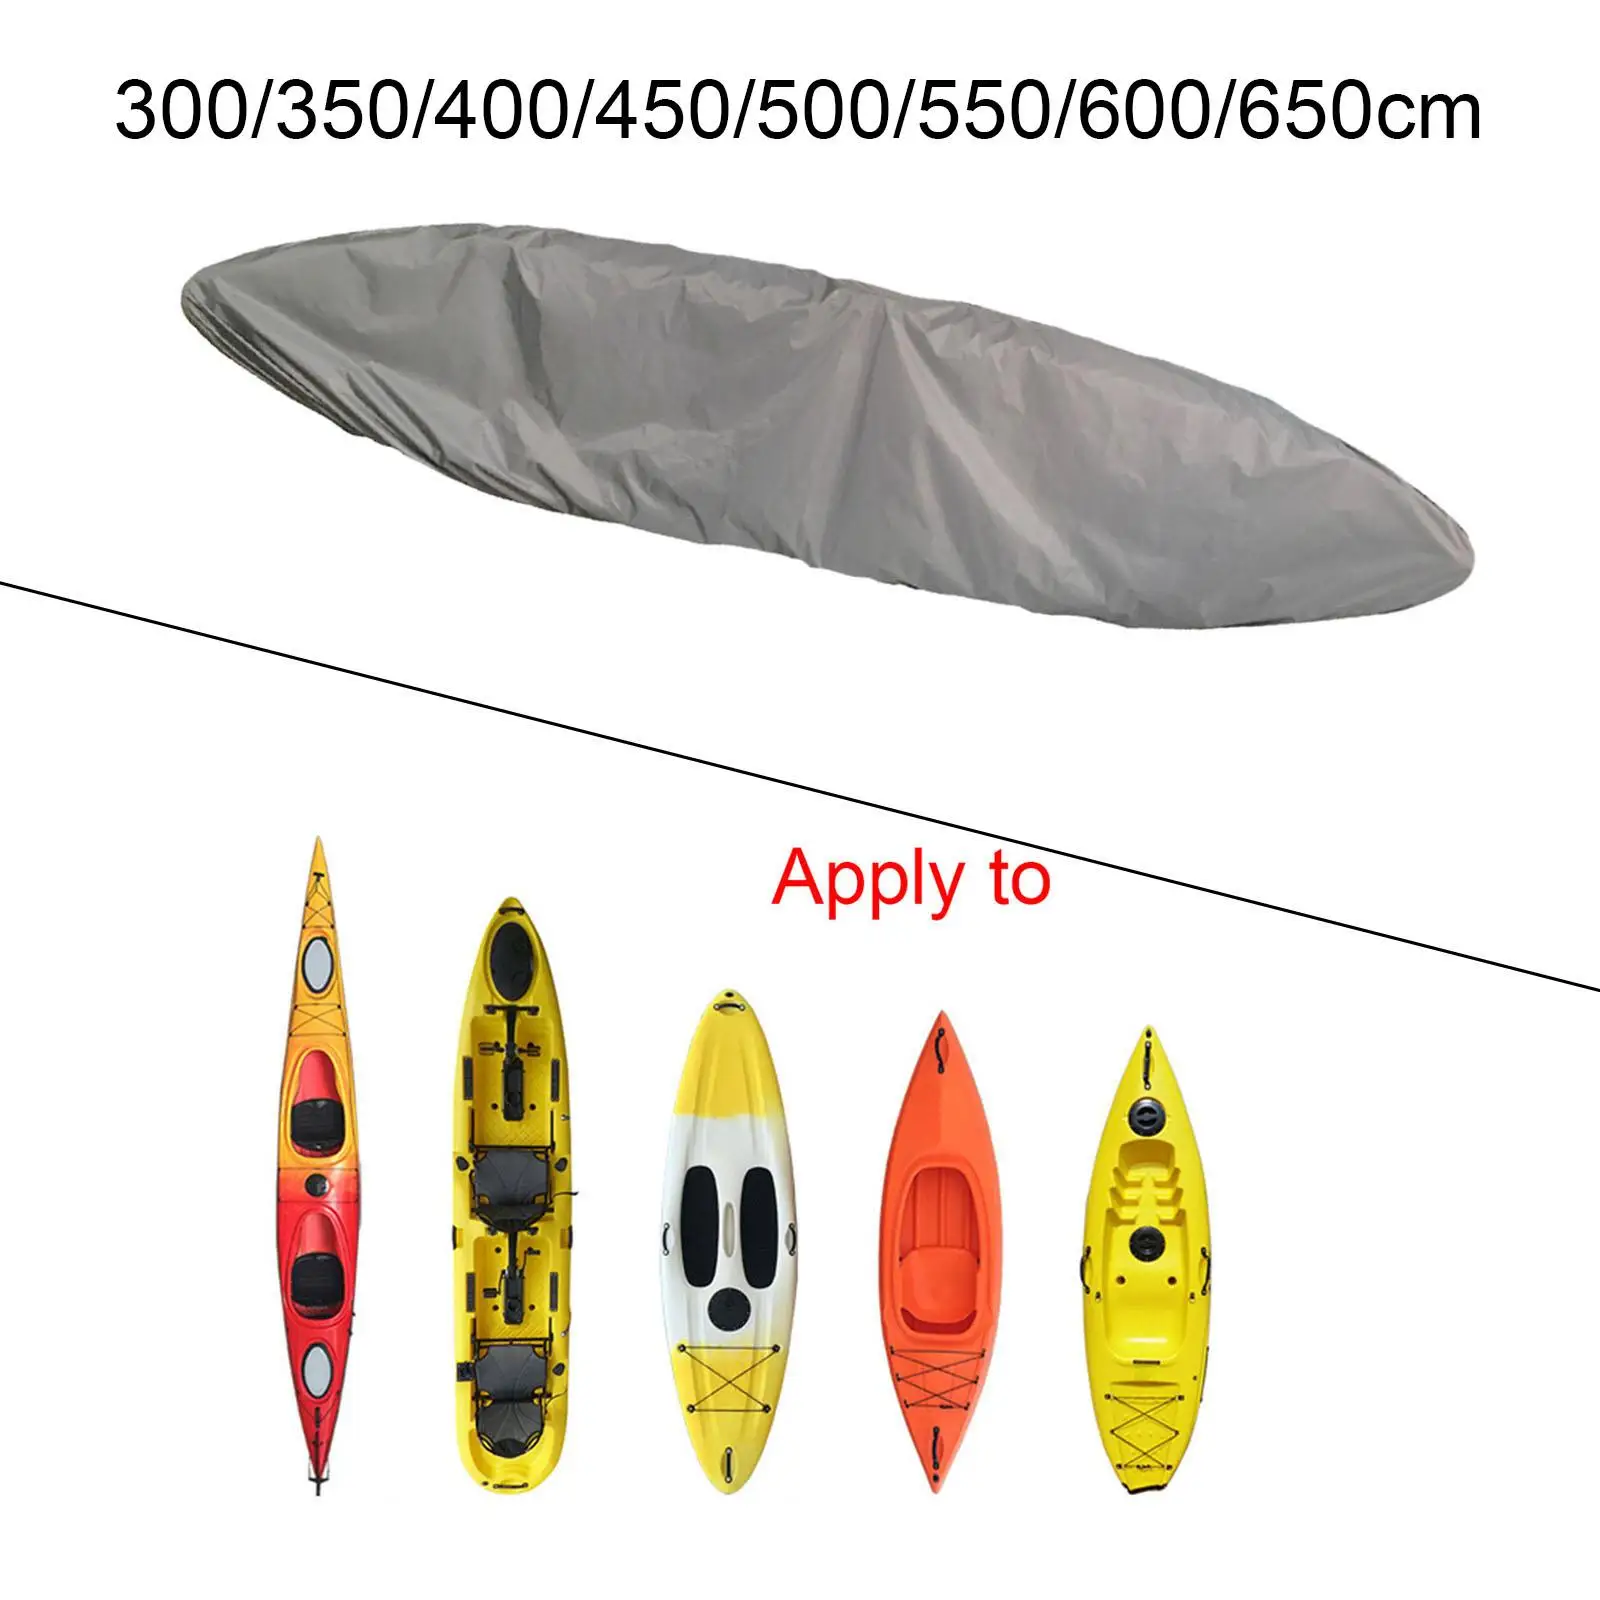 Canoe Cover Dustcover Protector Sunblock Shield Boat Storage Dust Cover